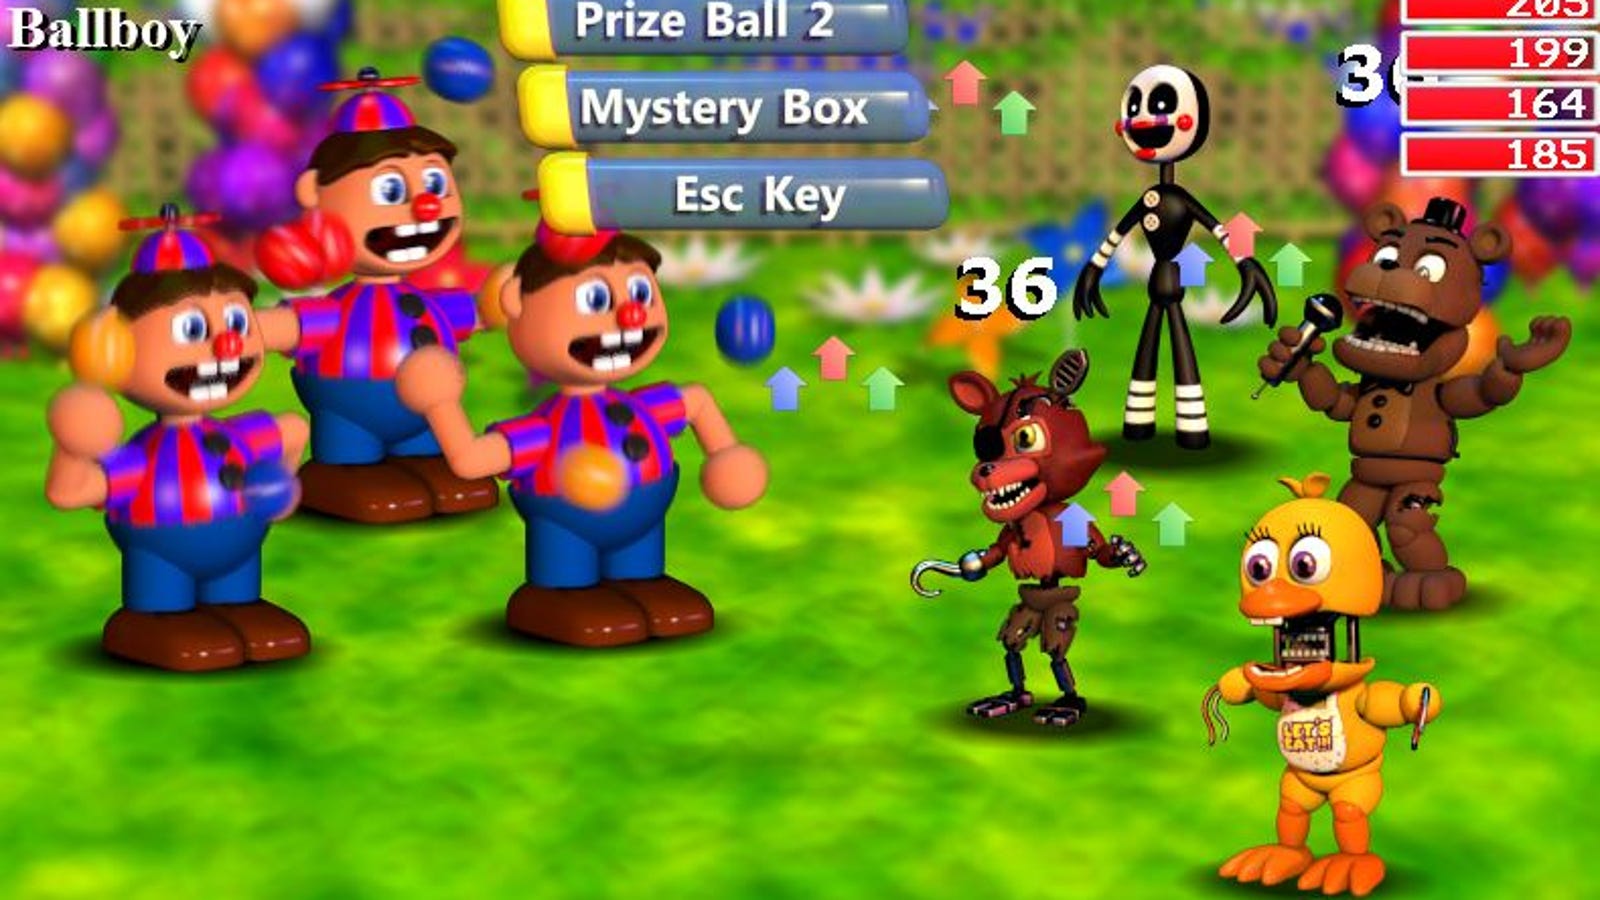 Fnaf World Scott Cawthon Character Roblox Beyond Codes 056 - tella tubby theme song roblox id roblox beyond codes 056